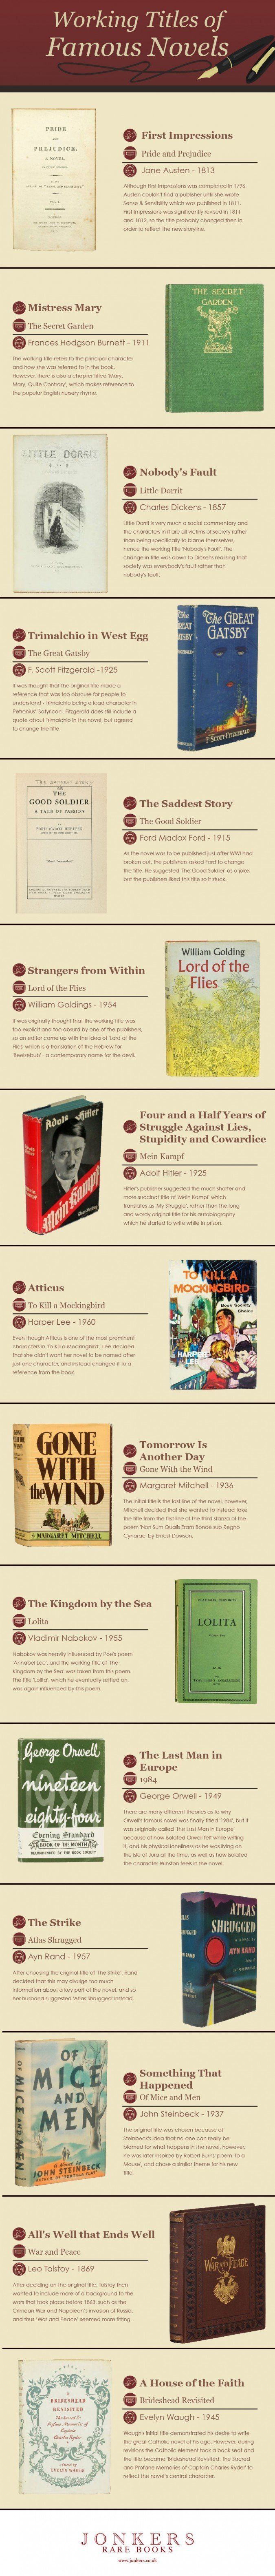 <a href="https://www.jonkers.co.uk/blog/working-titles-of-famous-novels" target="_blank" role="link" class=" js-entry-link cet-external-link" data-vars-item-name="This Jonkers infographic" data-vars-item-type="text" data-vars-unit-name="580f66f2e4b0a03911eeb680" data-vars-unit-type="buzz_body" data-vars-target-content-id="https://www.jonkers.co.uk/blog/working-titles-of-famous-novels" data-vars-target-content-type="url" data-vars-type="web_external_link" data-vars-subunit-name="article_body" data-vars-subunit-type="component" data-vars-position-in-subunit="0">This Jonkers infographic</a> tells the backstories behind working titles of classic books.